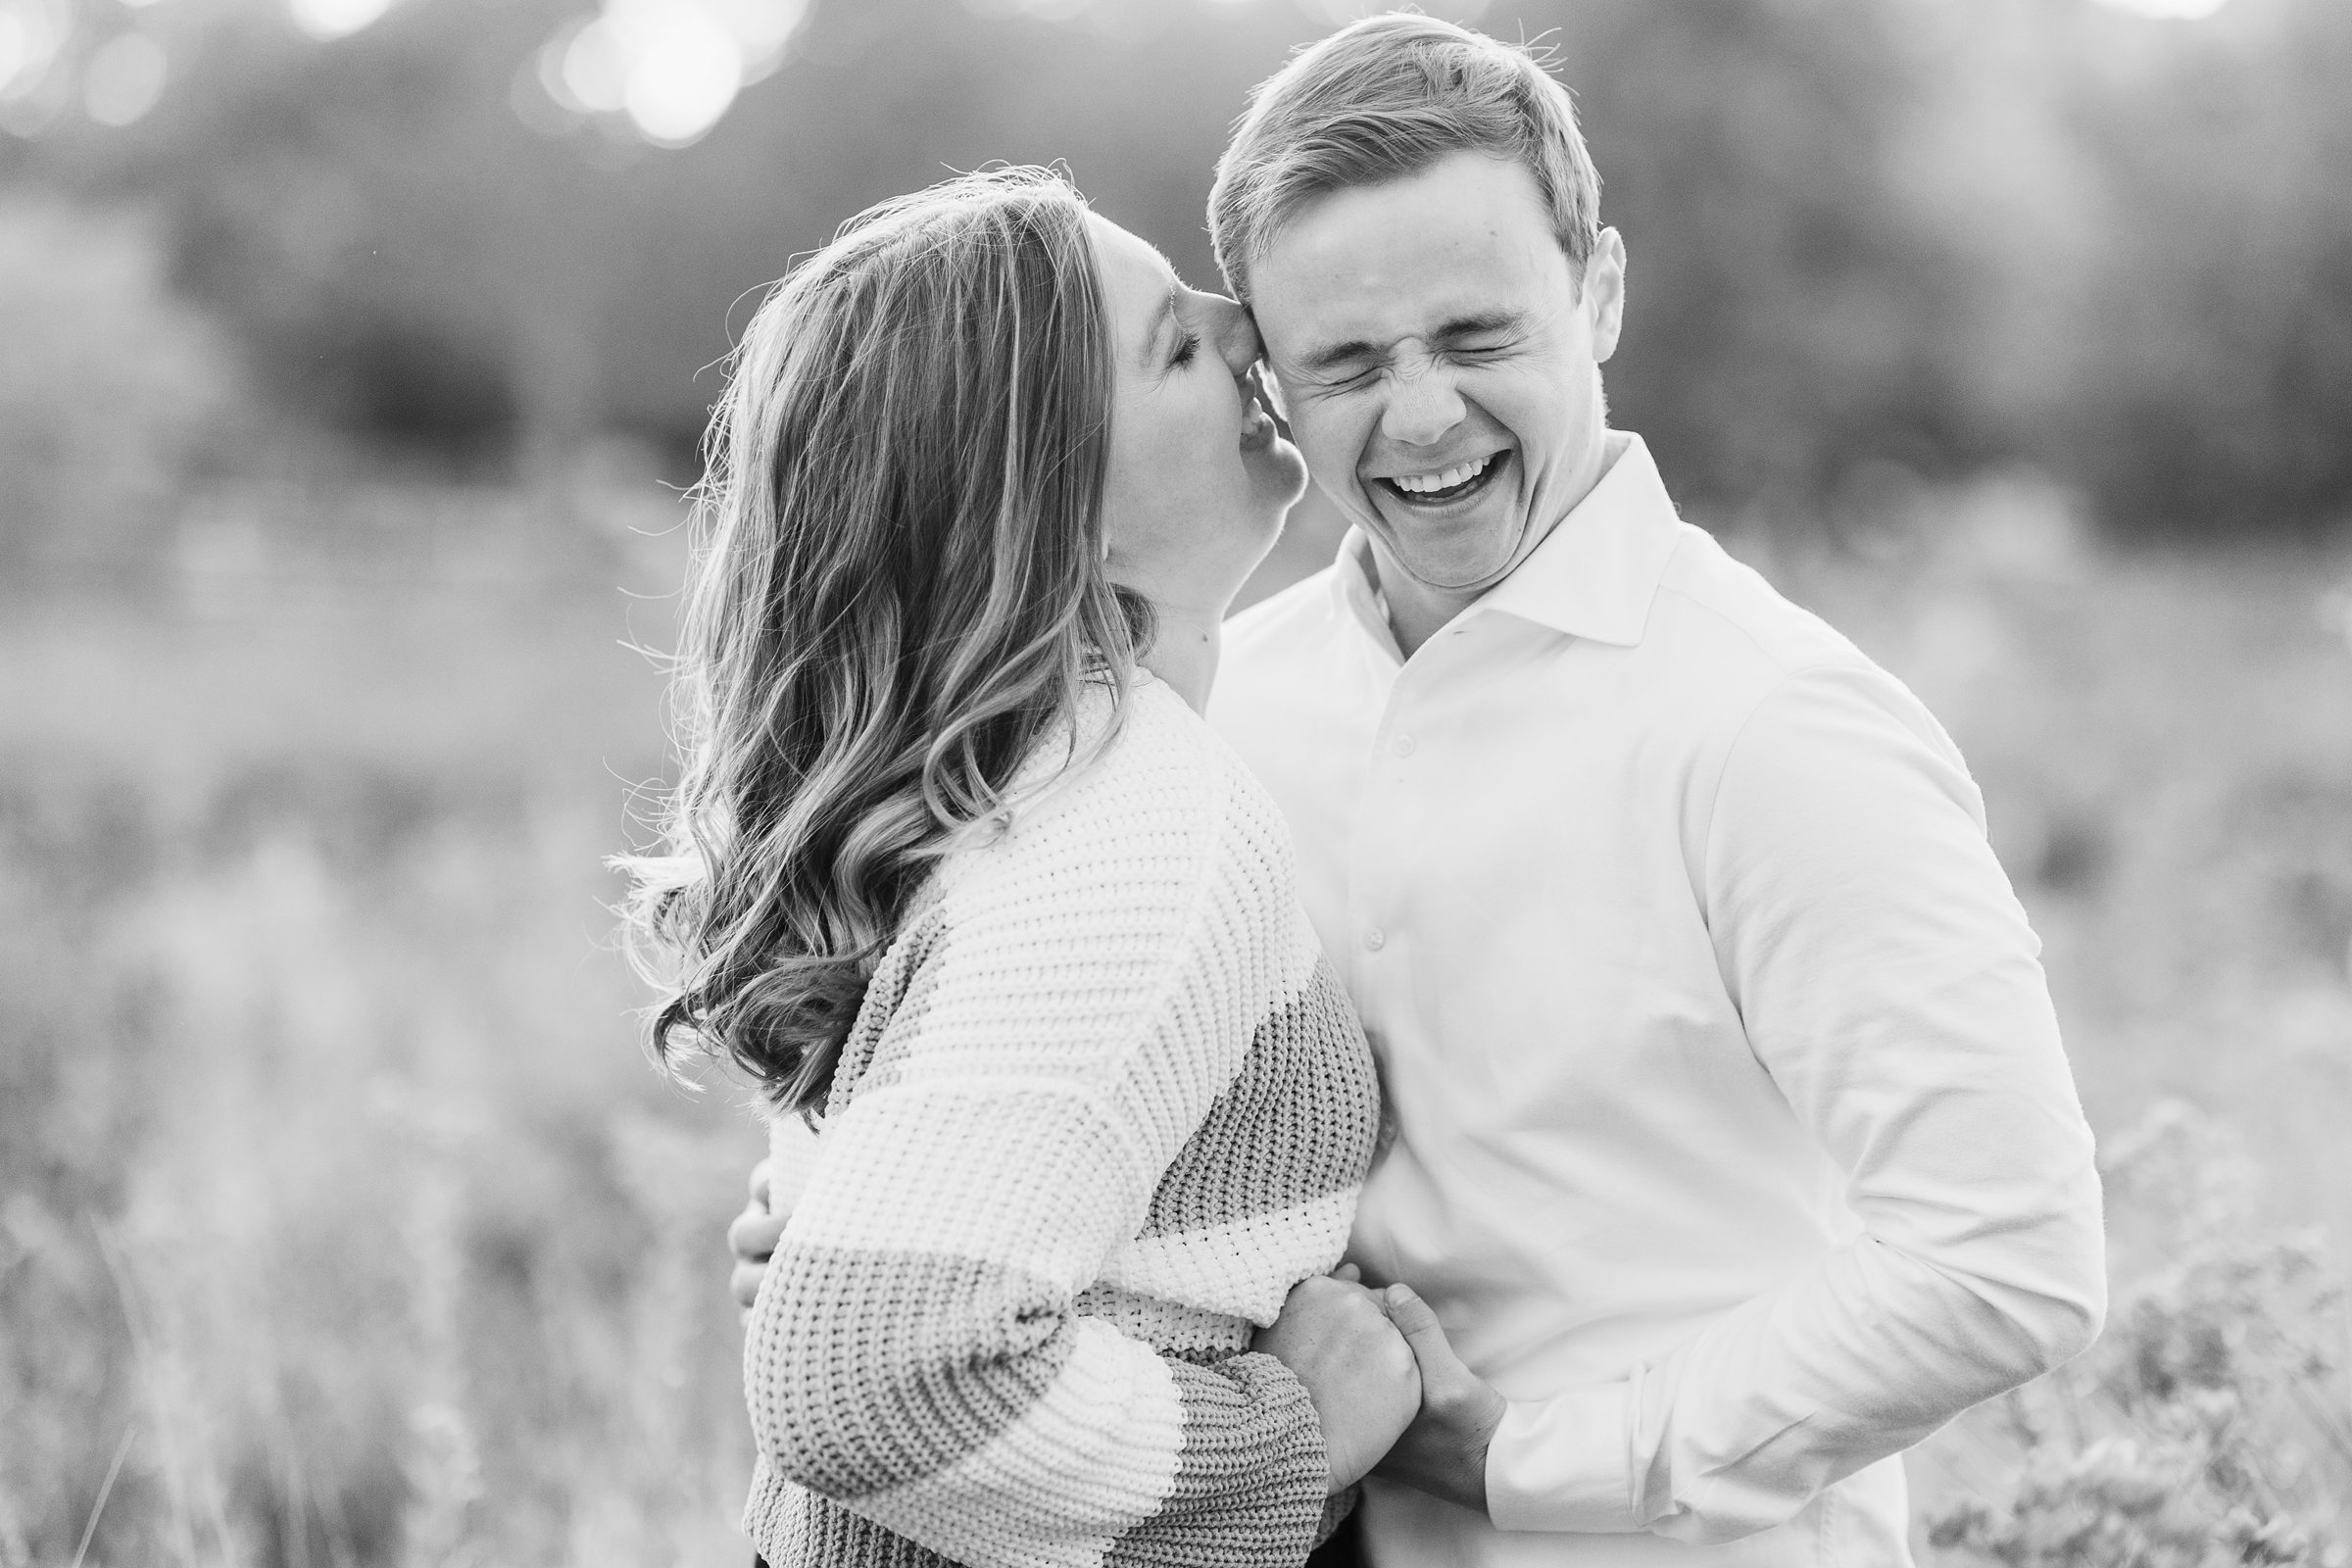 Couple laugh together during their engagement sessionat Lincoln Park in Chicago, Illinois.